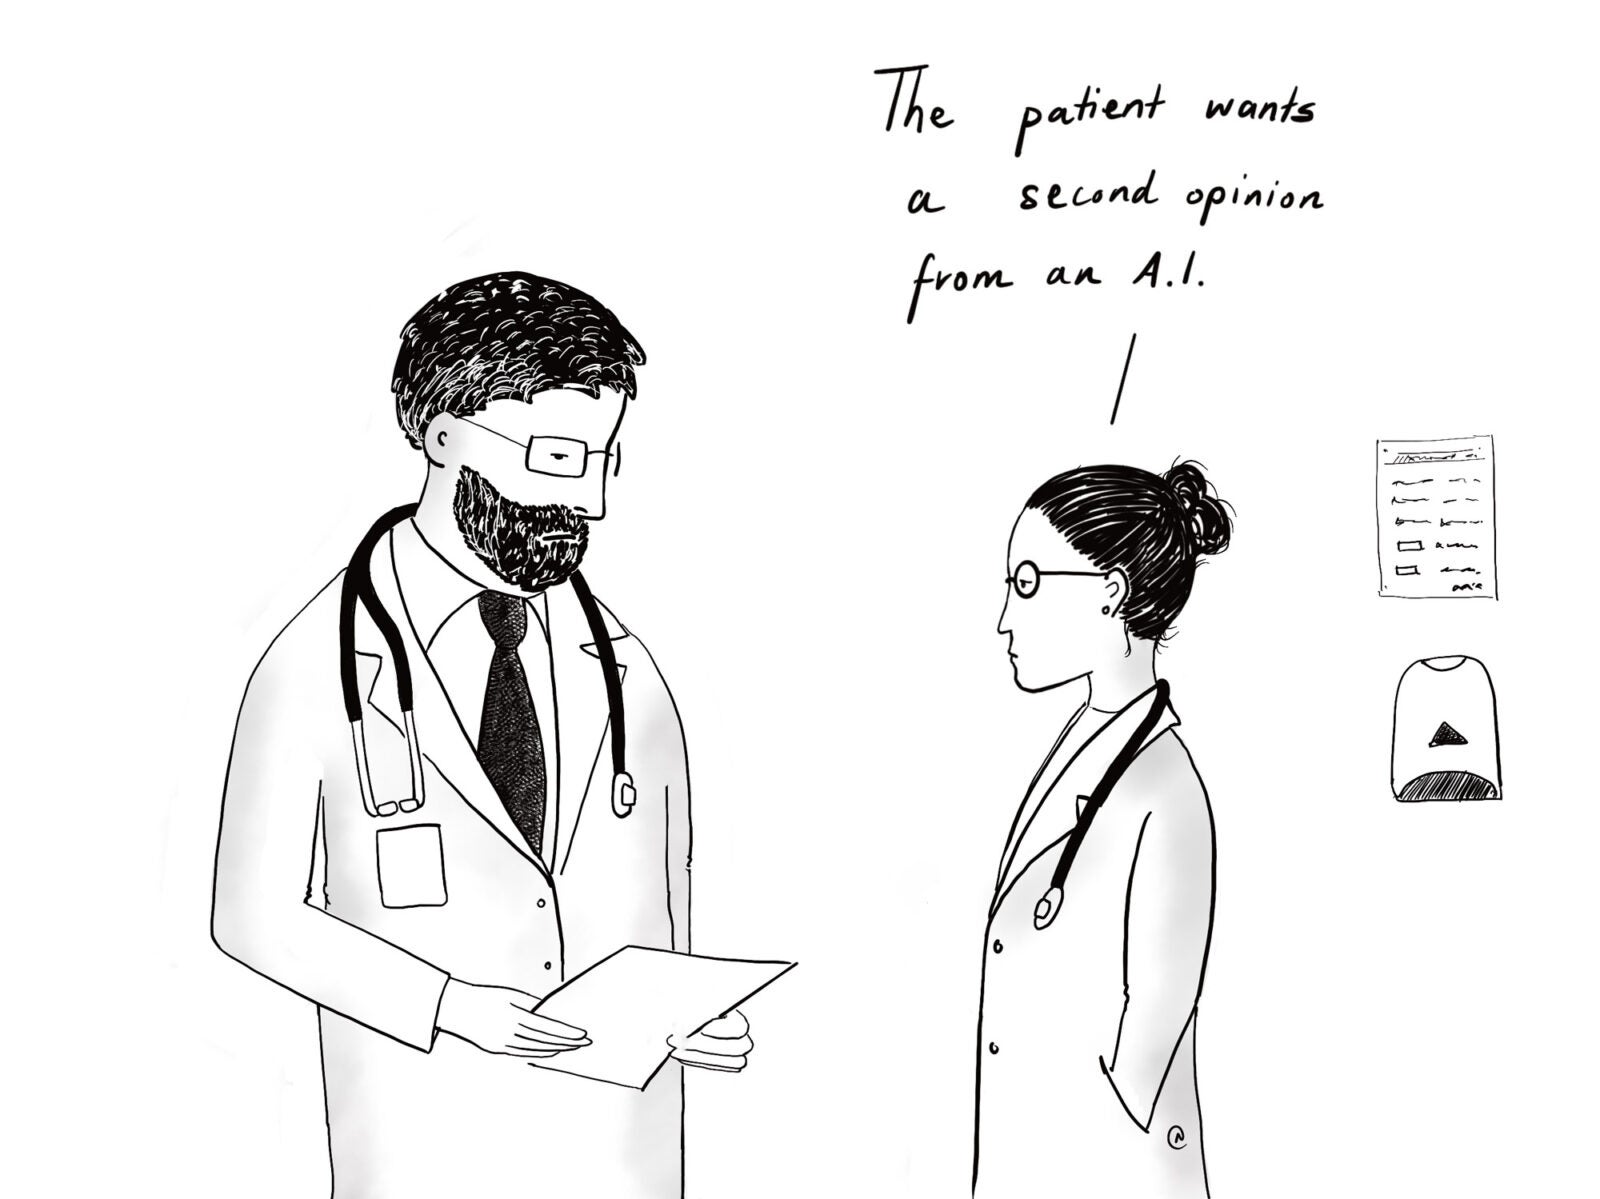 Editorial Cartoon: A female clinician speaks to a male colleague. She says "The patient wants a second opinion from an A.I."